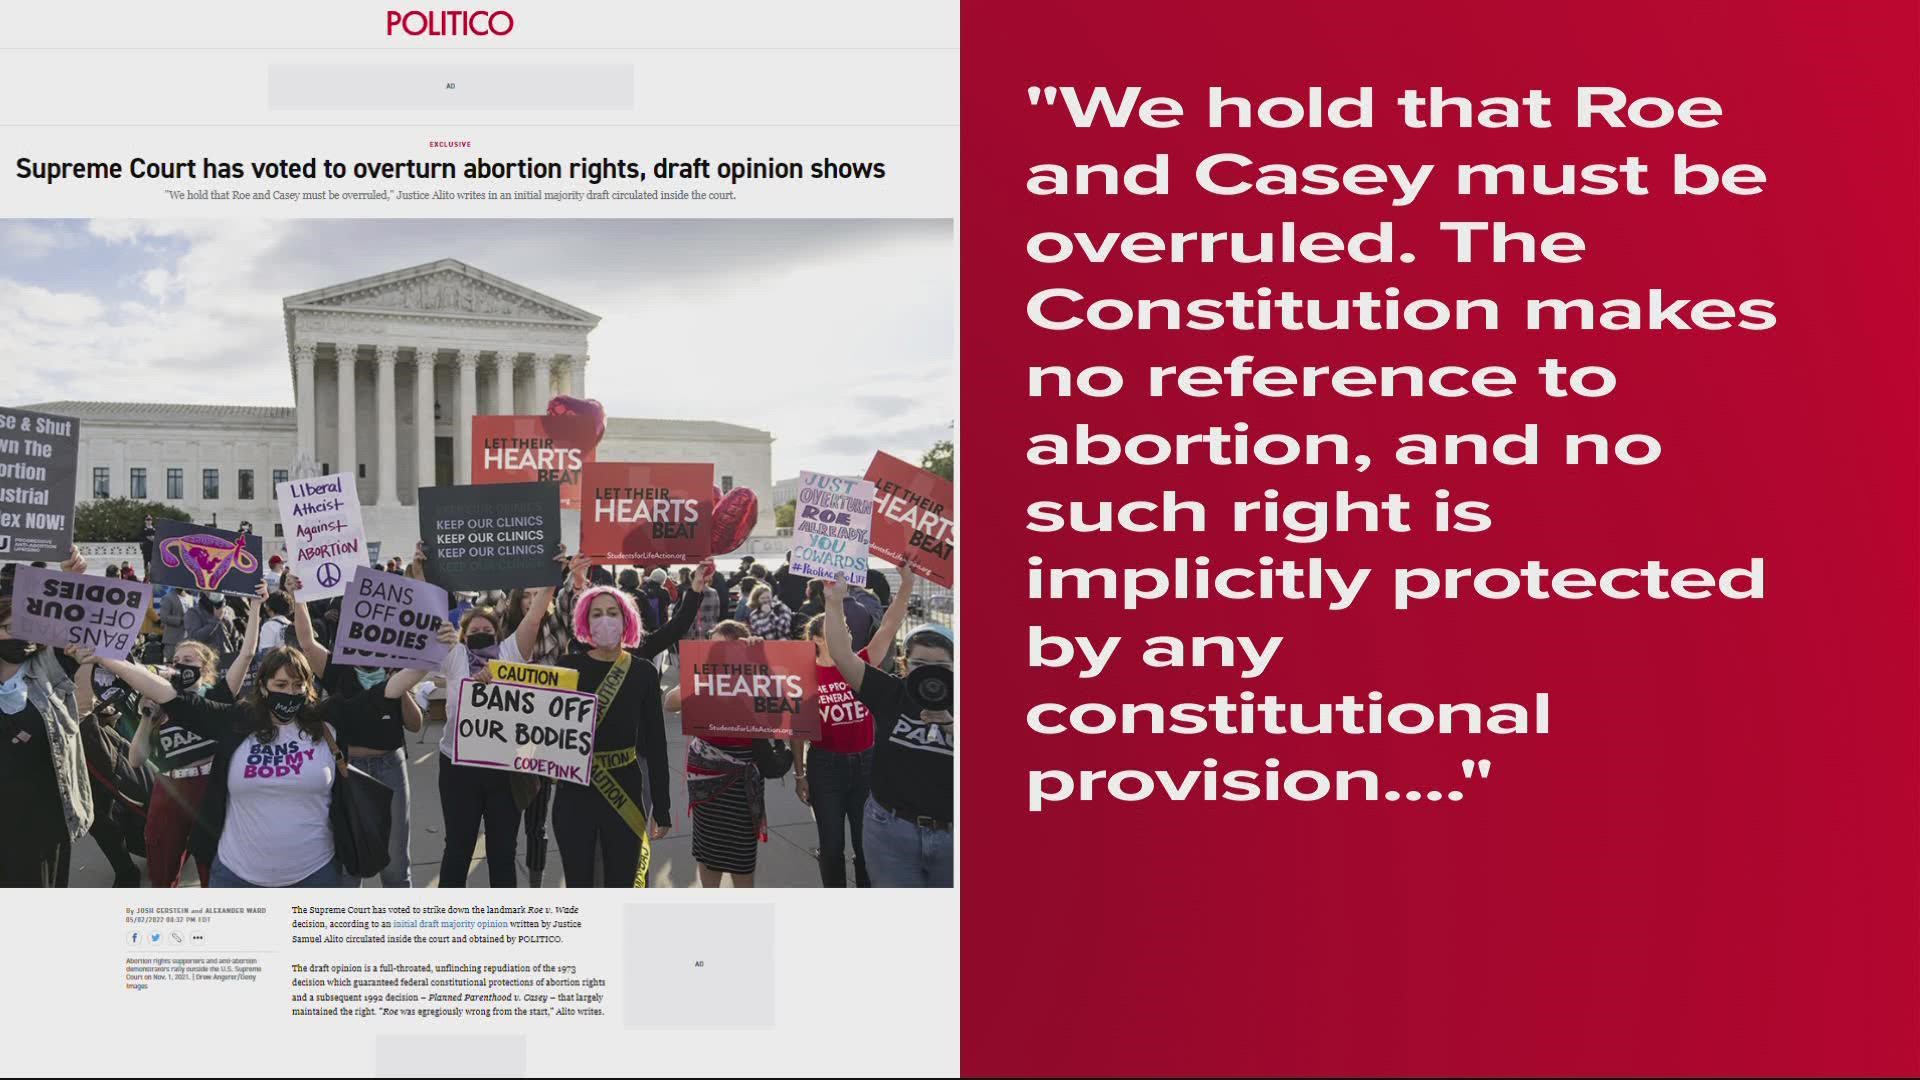 Politico recently reported on leaked U.S. Supreme Court documents they obtained indicating the historic "Roe v. Wade" could be soon overturned.